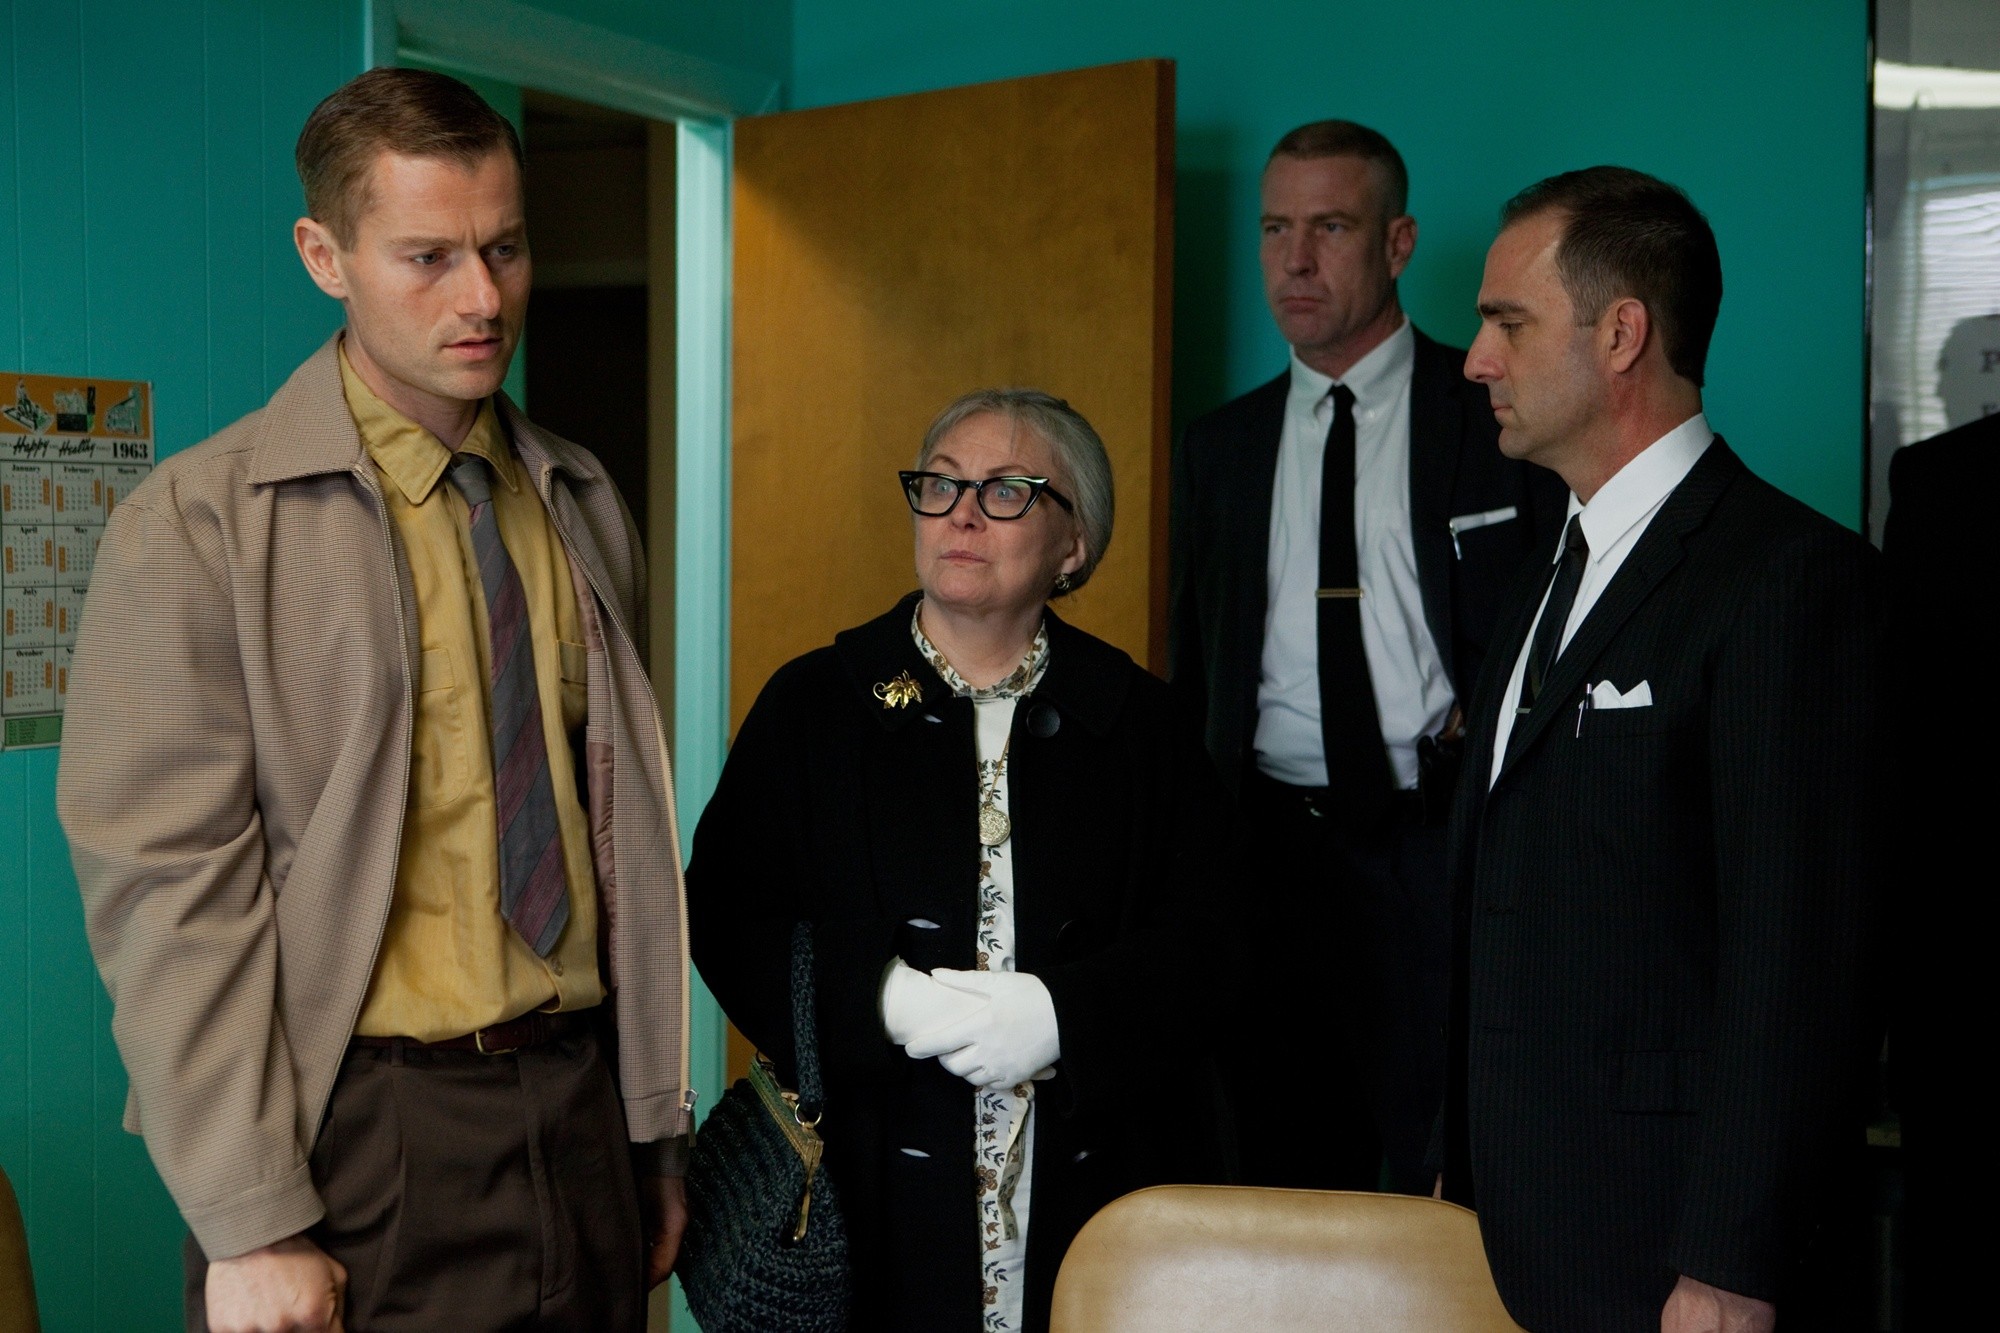 James Badge Dale stars as Robert Edward Lee Oswald, Jr. and Jacki Weaver stars as Marguerite Oswald in Exclusive Releasing's Parkland (2013)